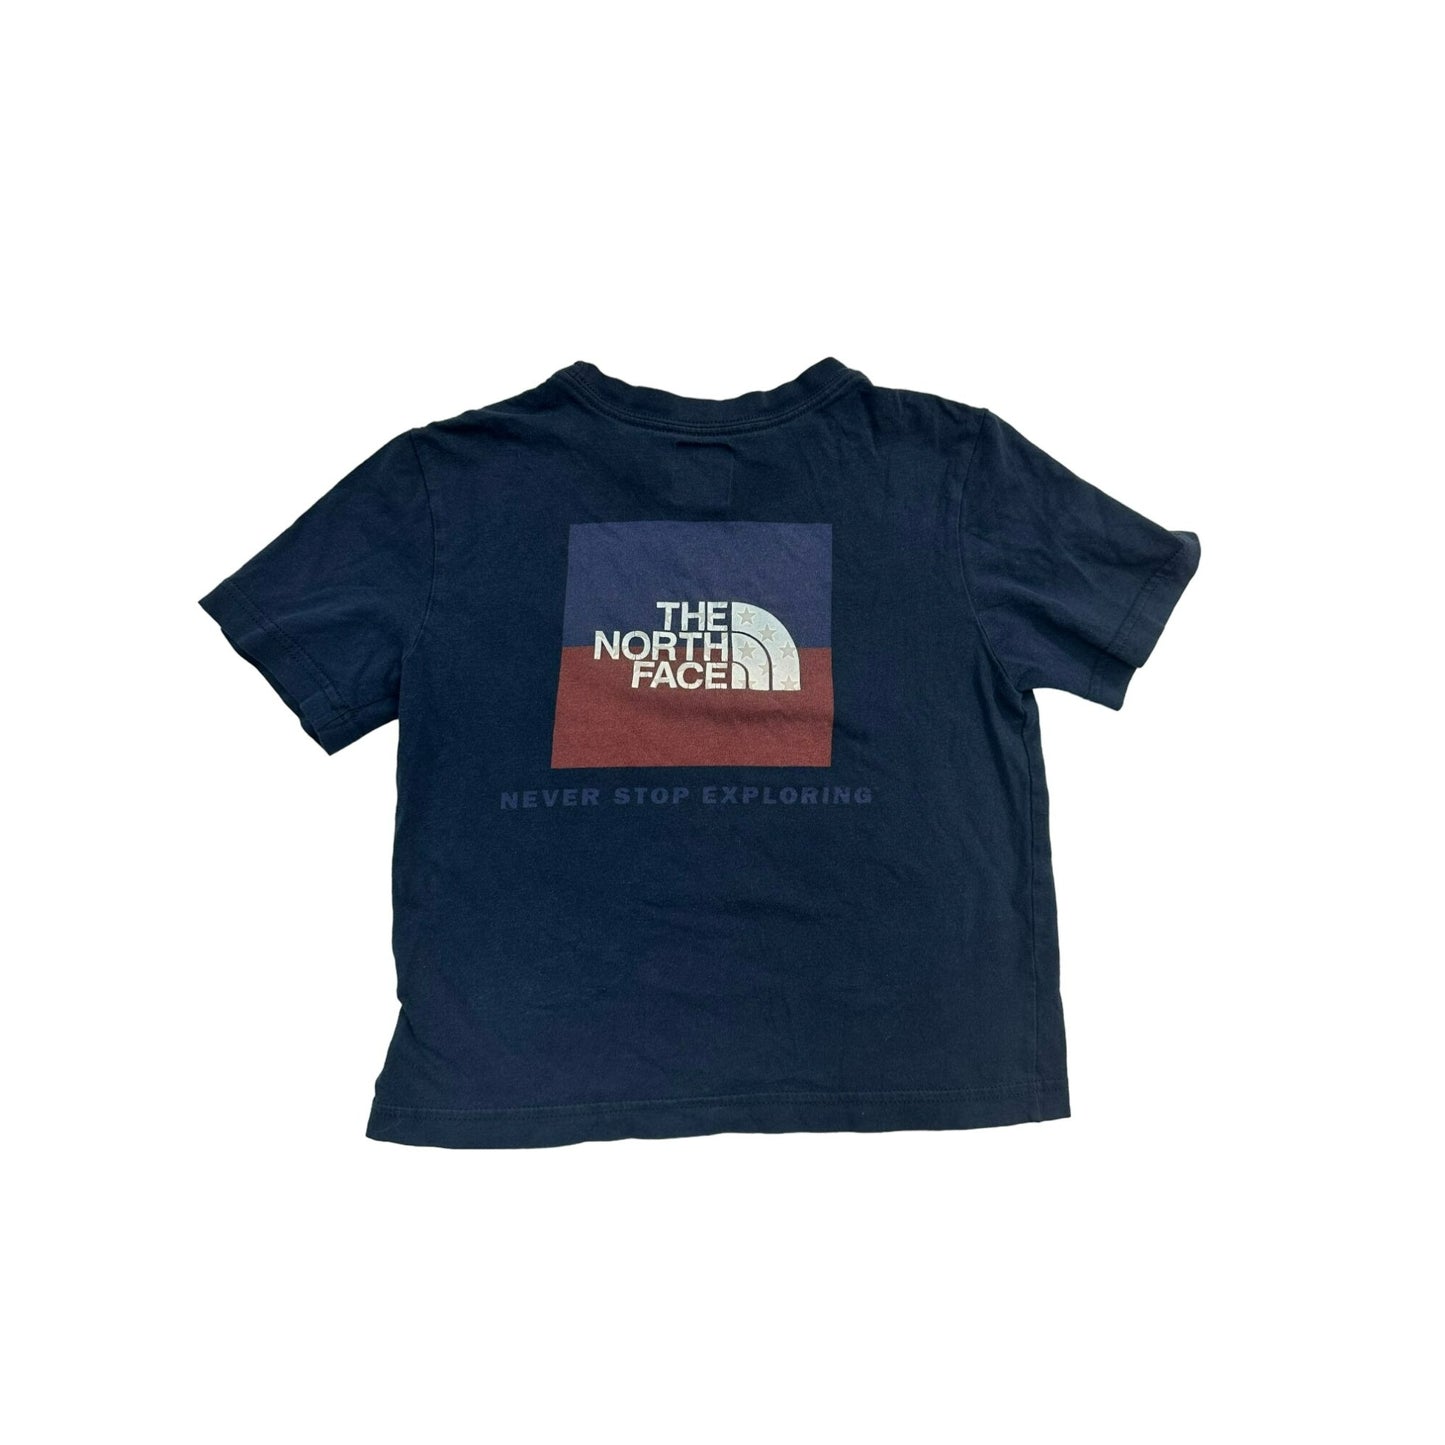 THE NORTH FACE Kid’s Tee